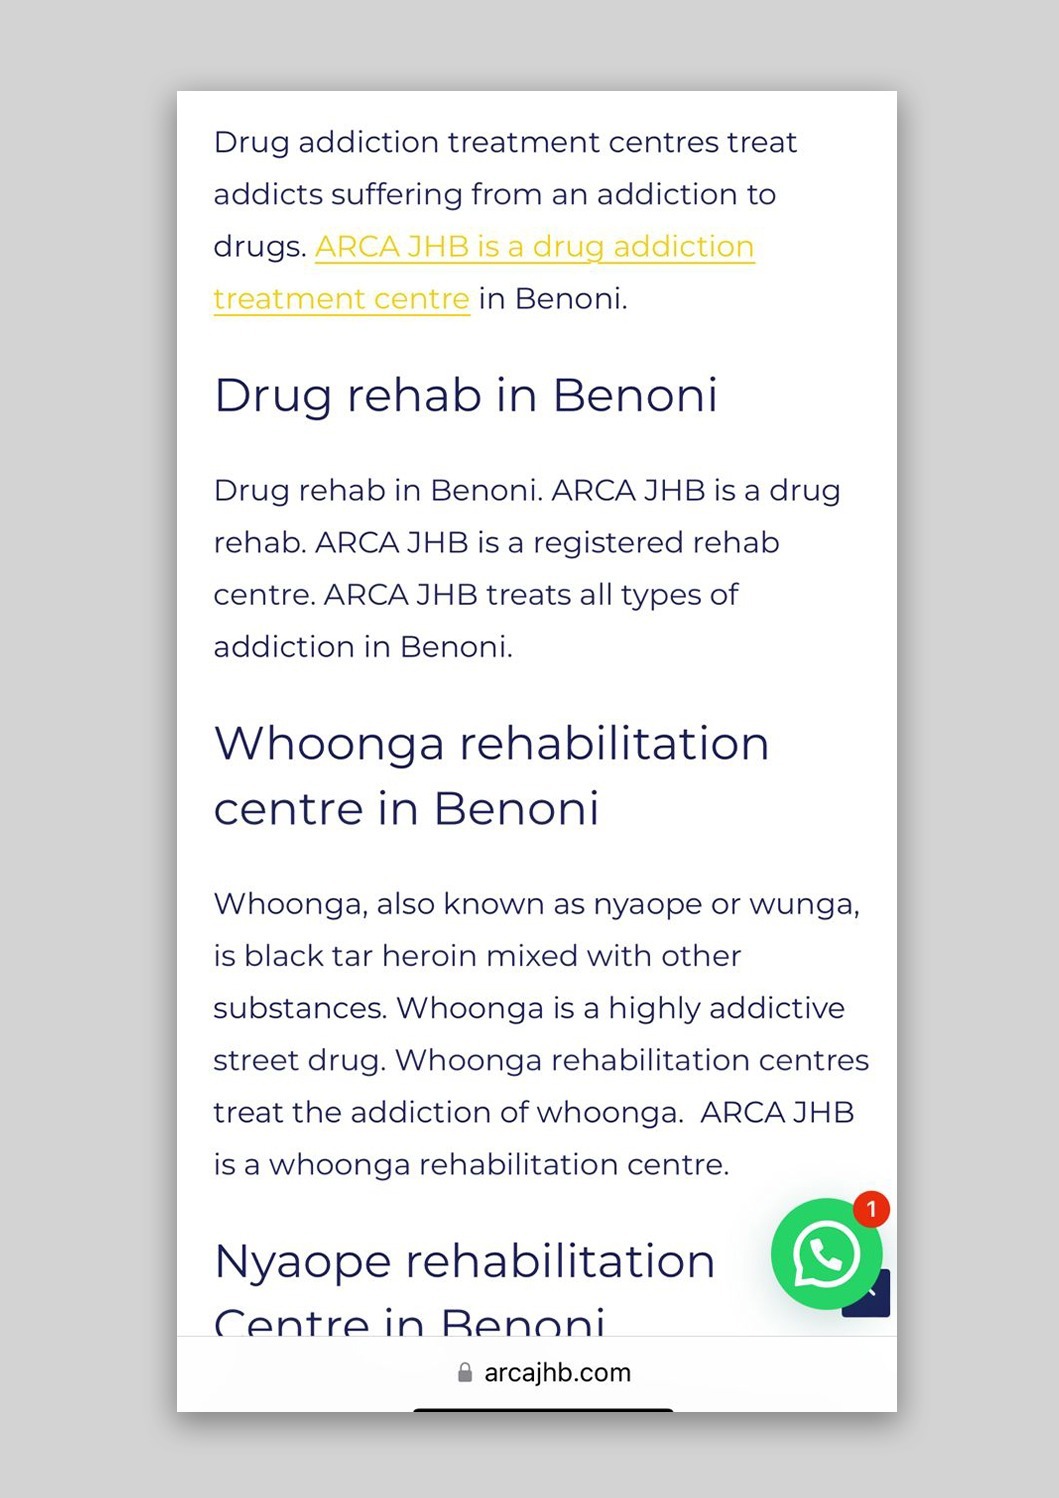 Detailed content from ARCA Johannesburg about their drug and alcohol rehabilitation programs.